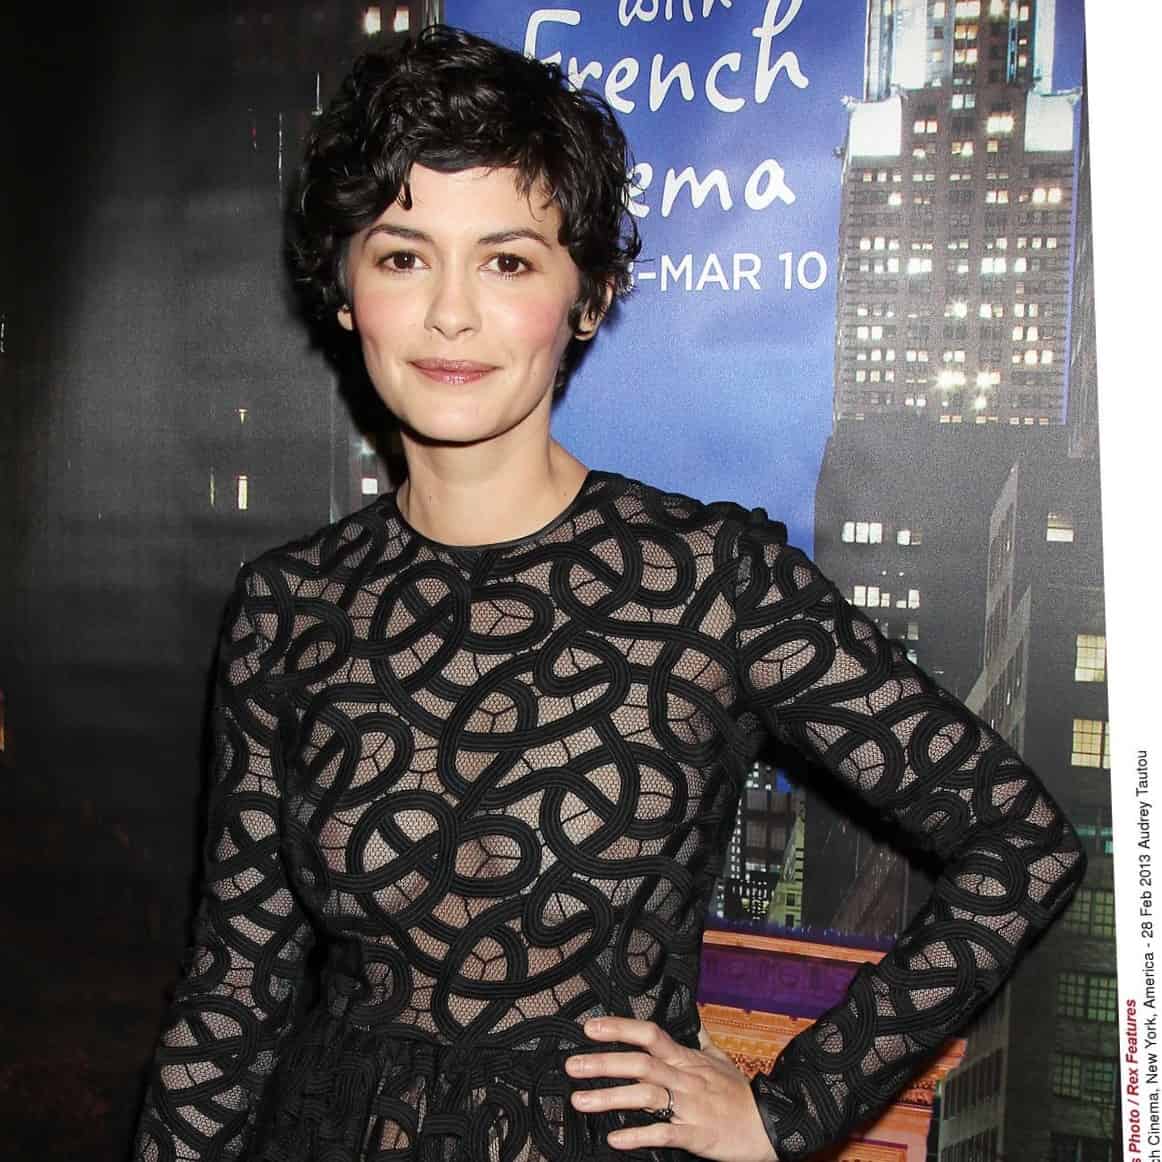 Audrey Justine Tautou was born in Beaumont, France, on August 9, 1976